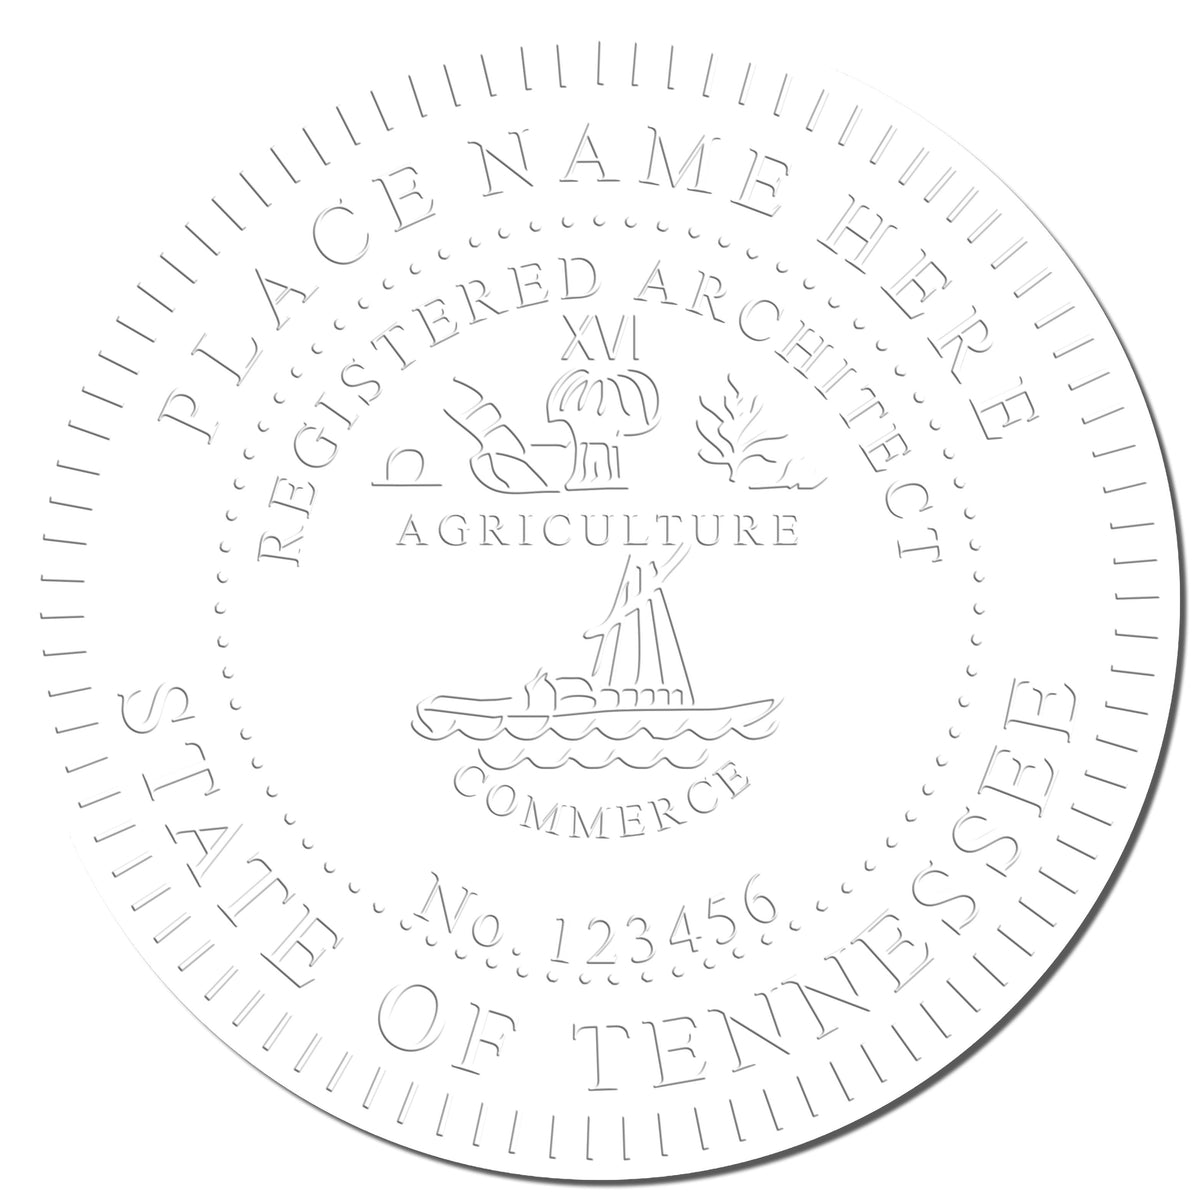 This paper is stamped with a sample imprint of the Hybrid Tennessee Architect Seal, signifying its quality and reliability.